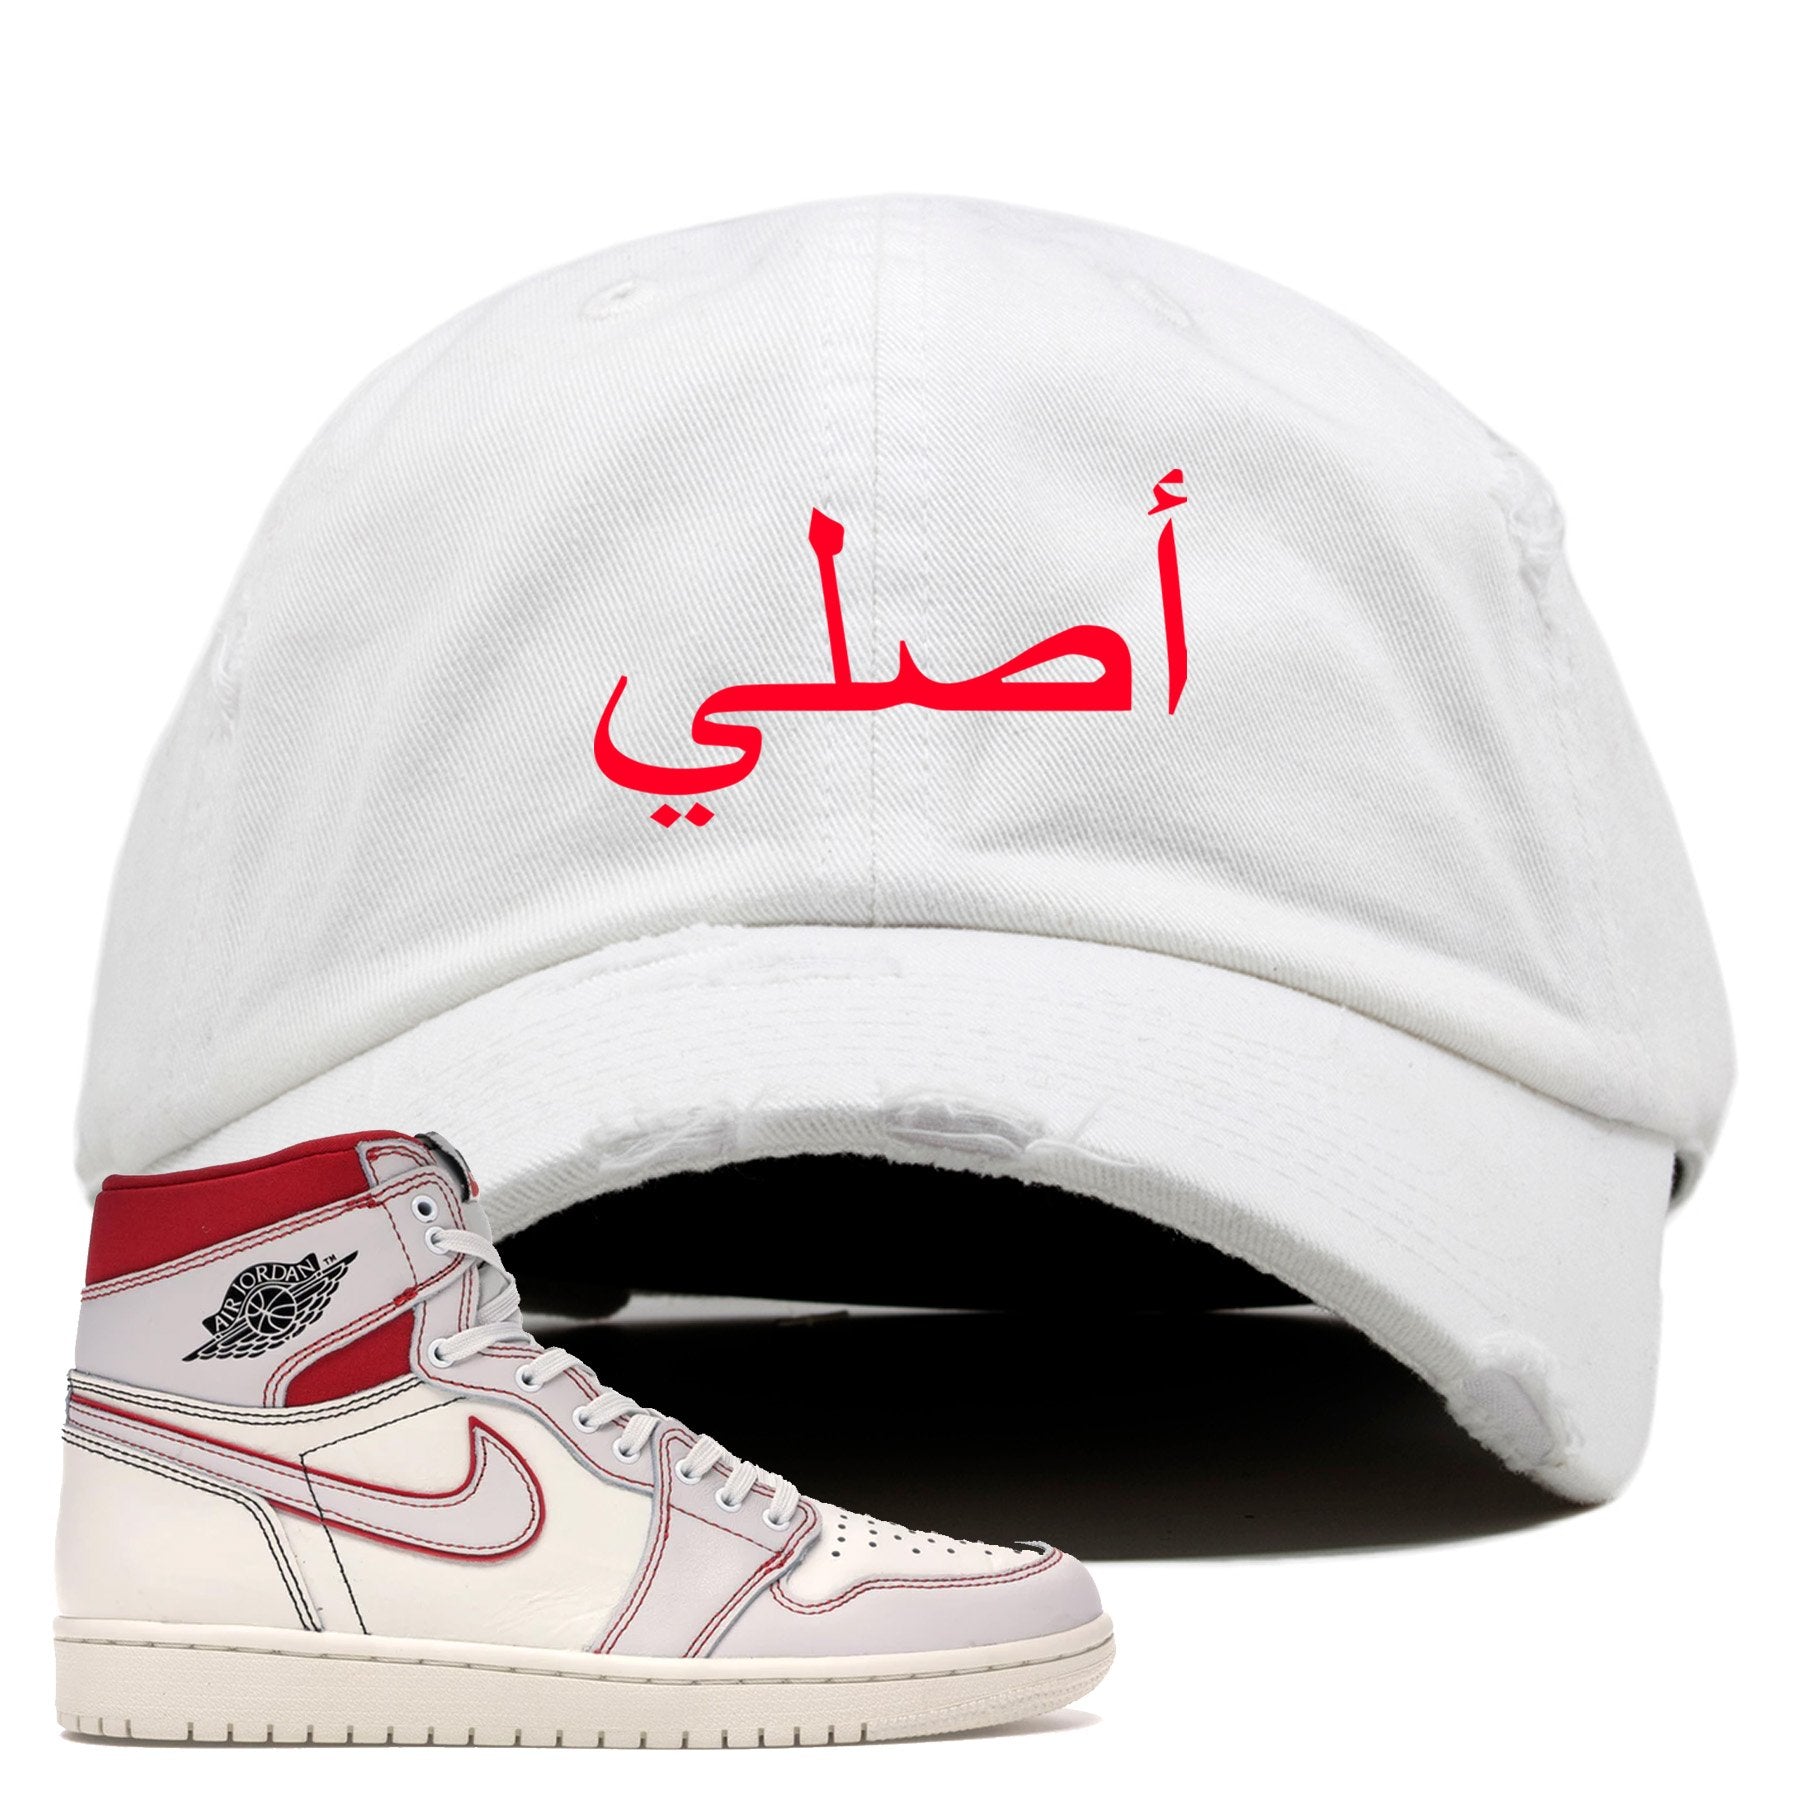 White and red hat to match the white and red Jordan 1 shoes